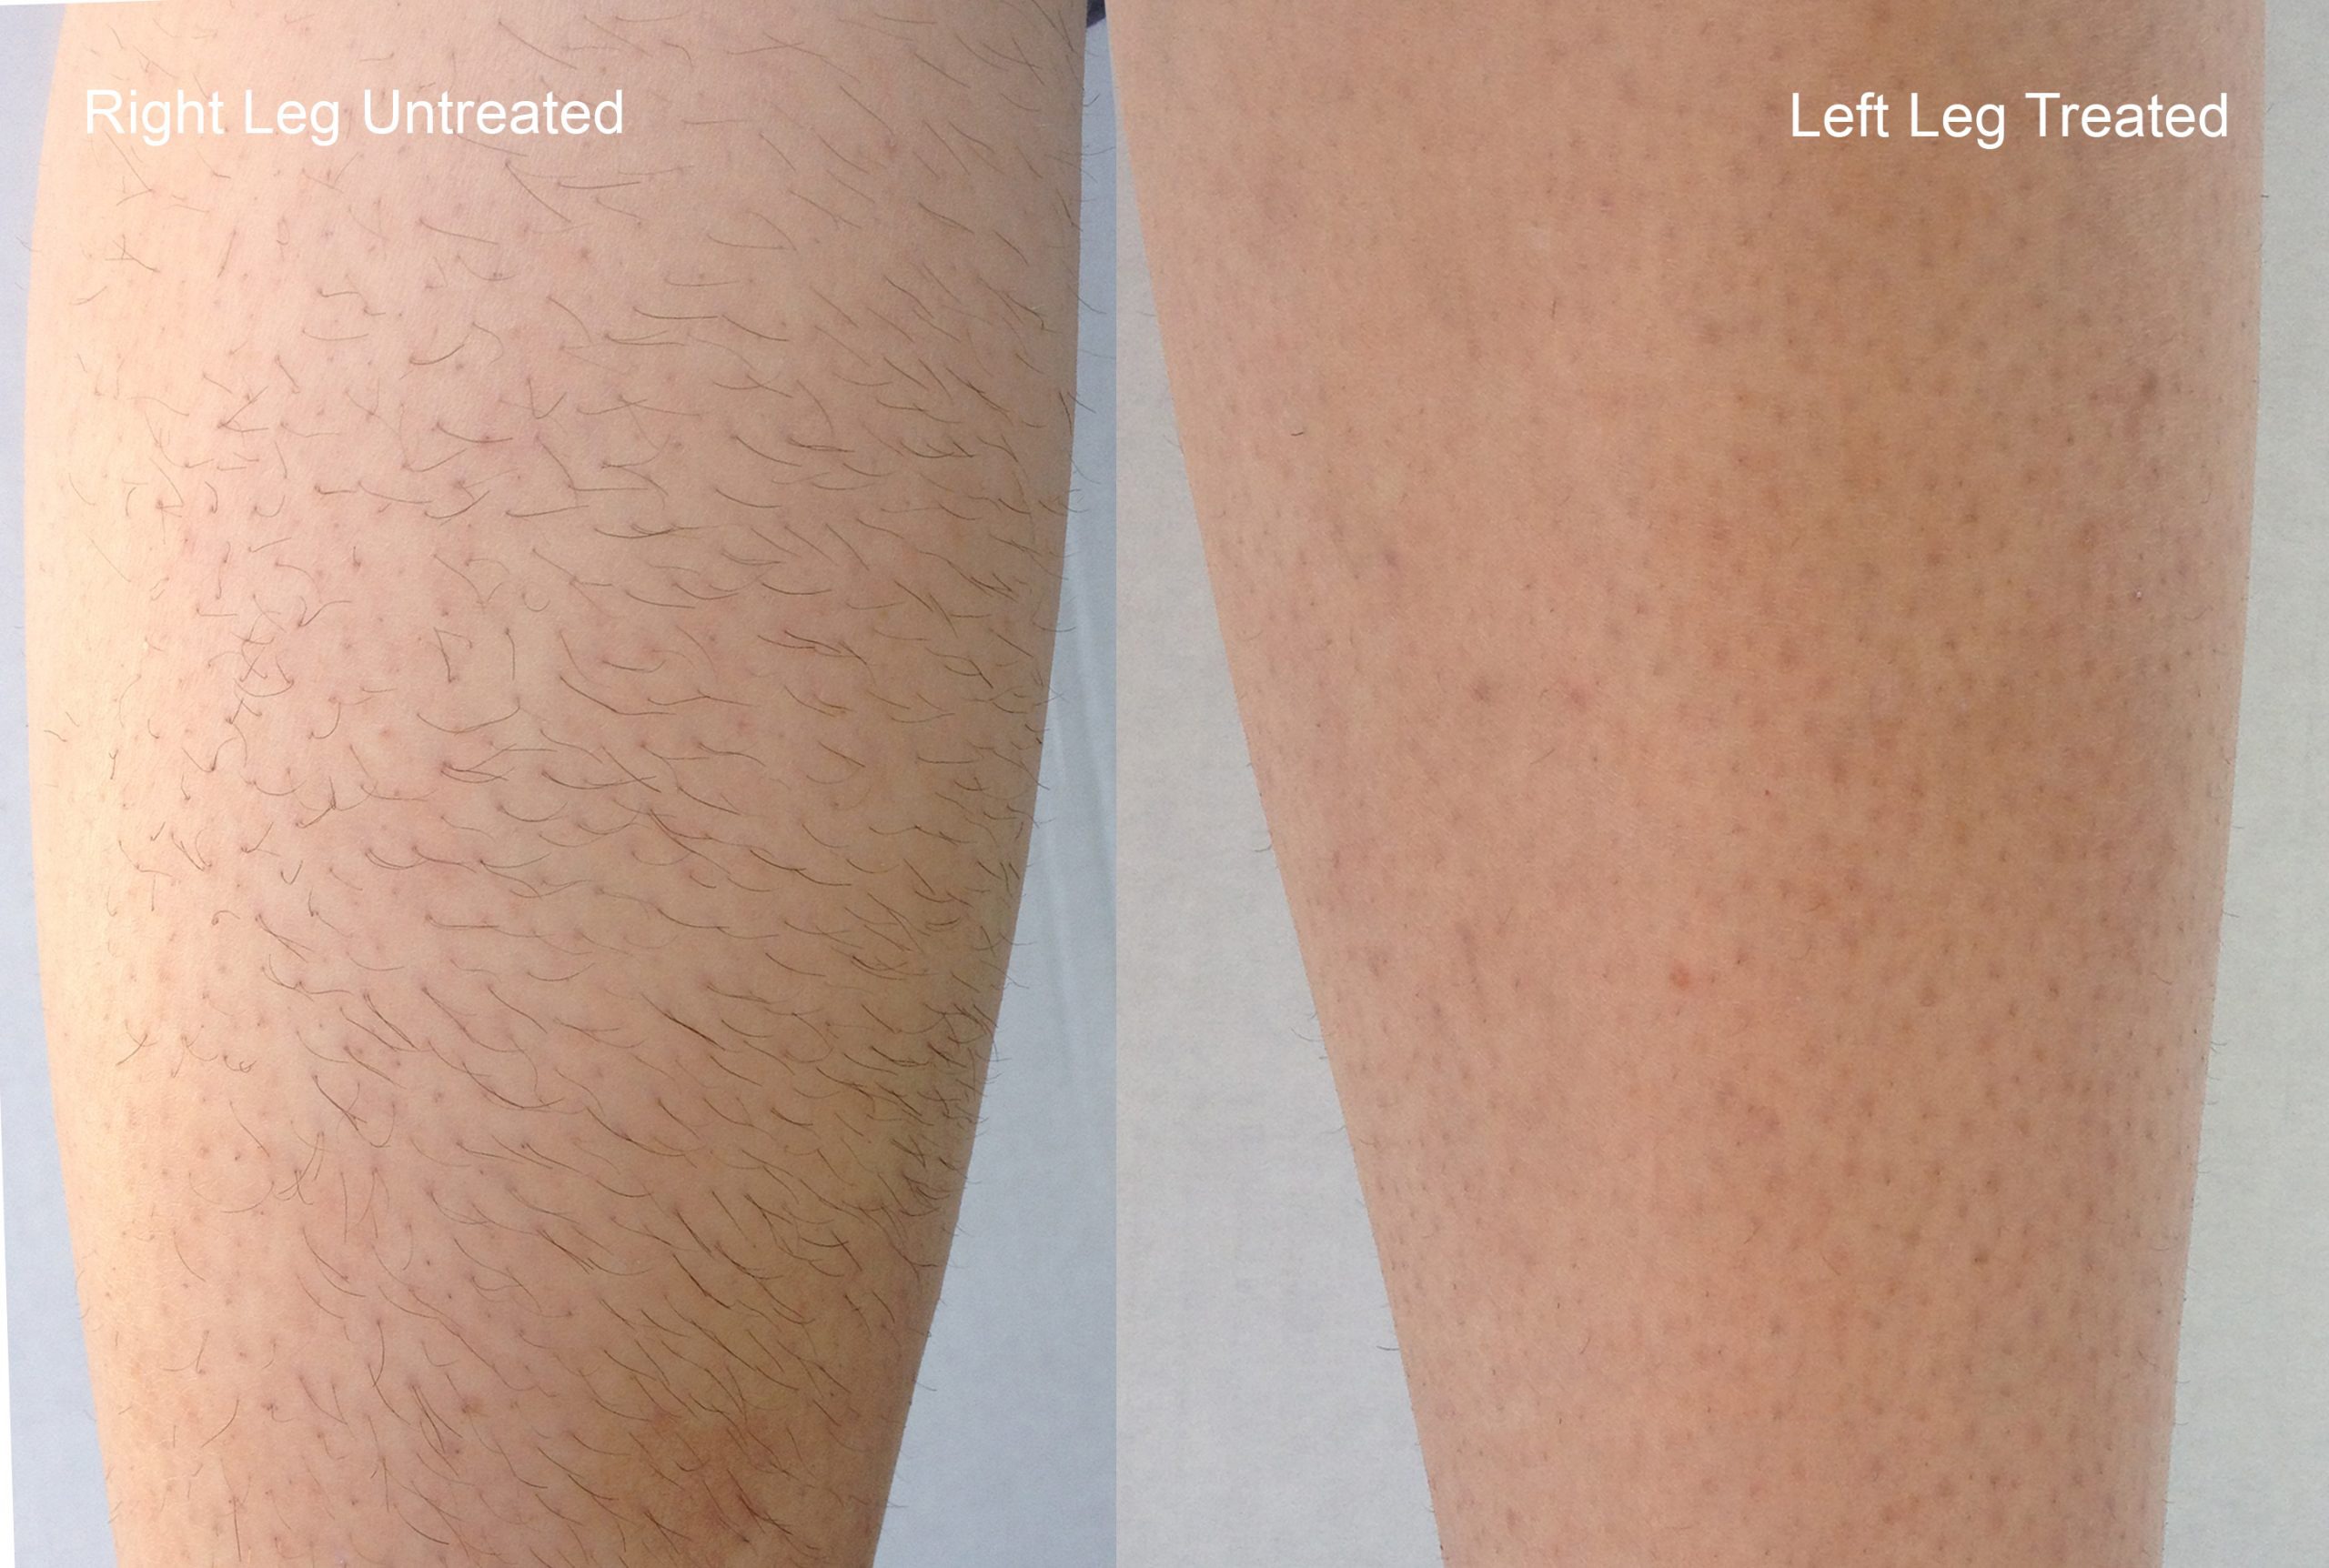 Laser Hair Removal Treatment in Culver City, CA - True Jewel Cosmetic Center